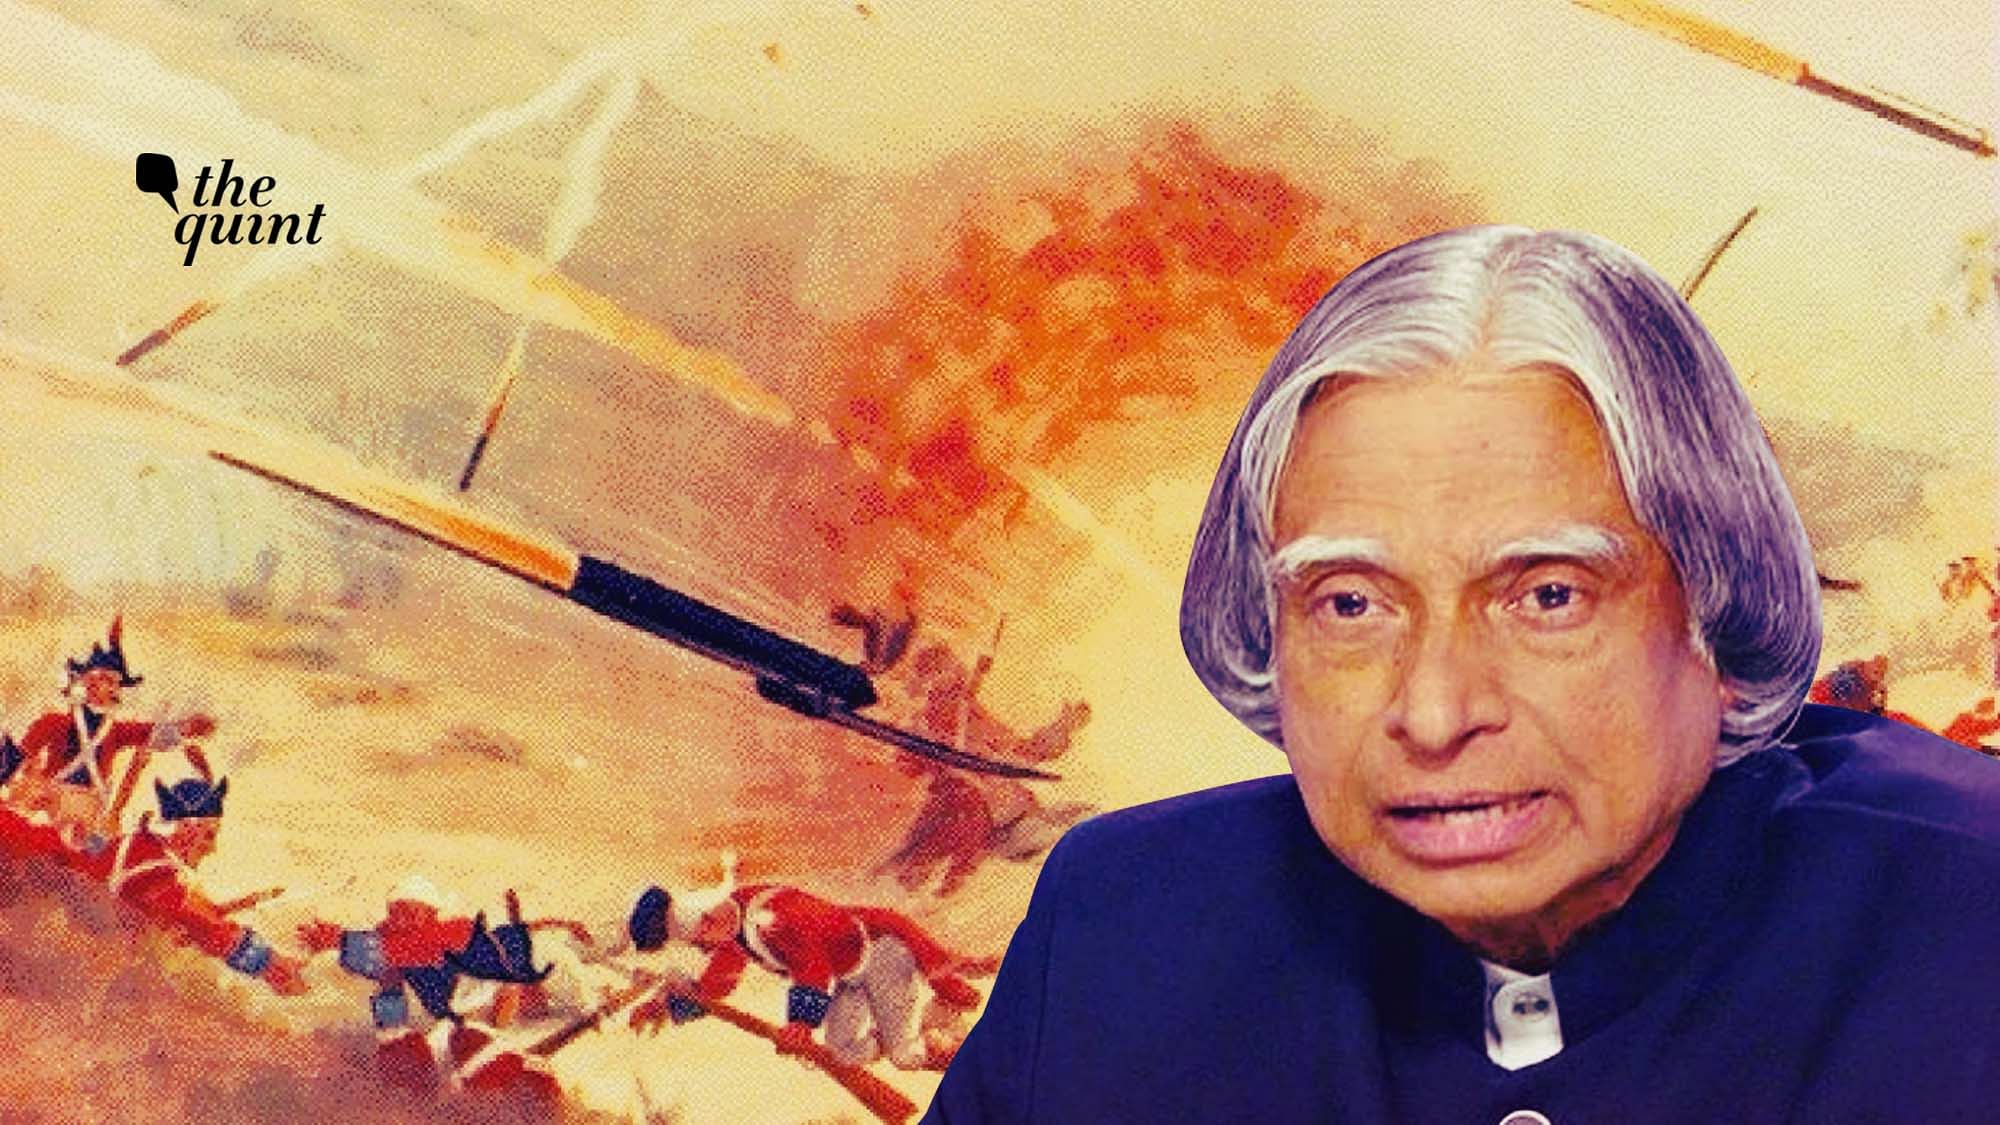 On becoming President, Kalam ordered a study into Tipu Sultan’s rocket technology.